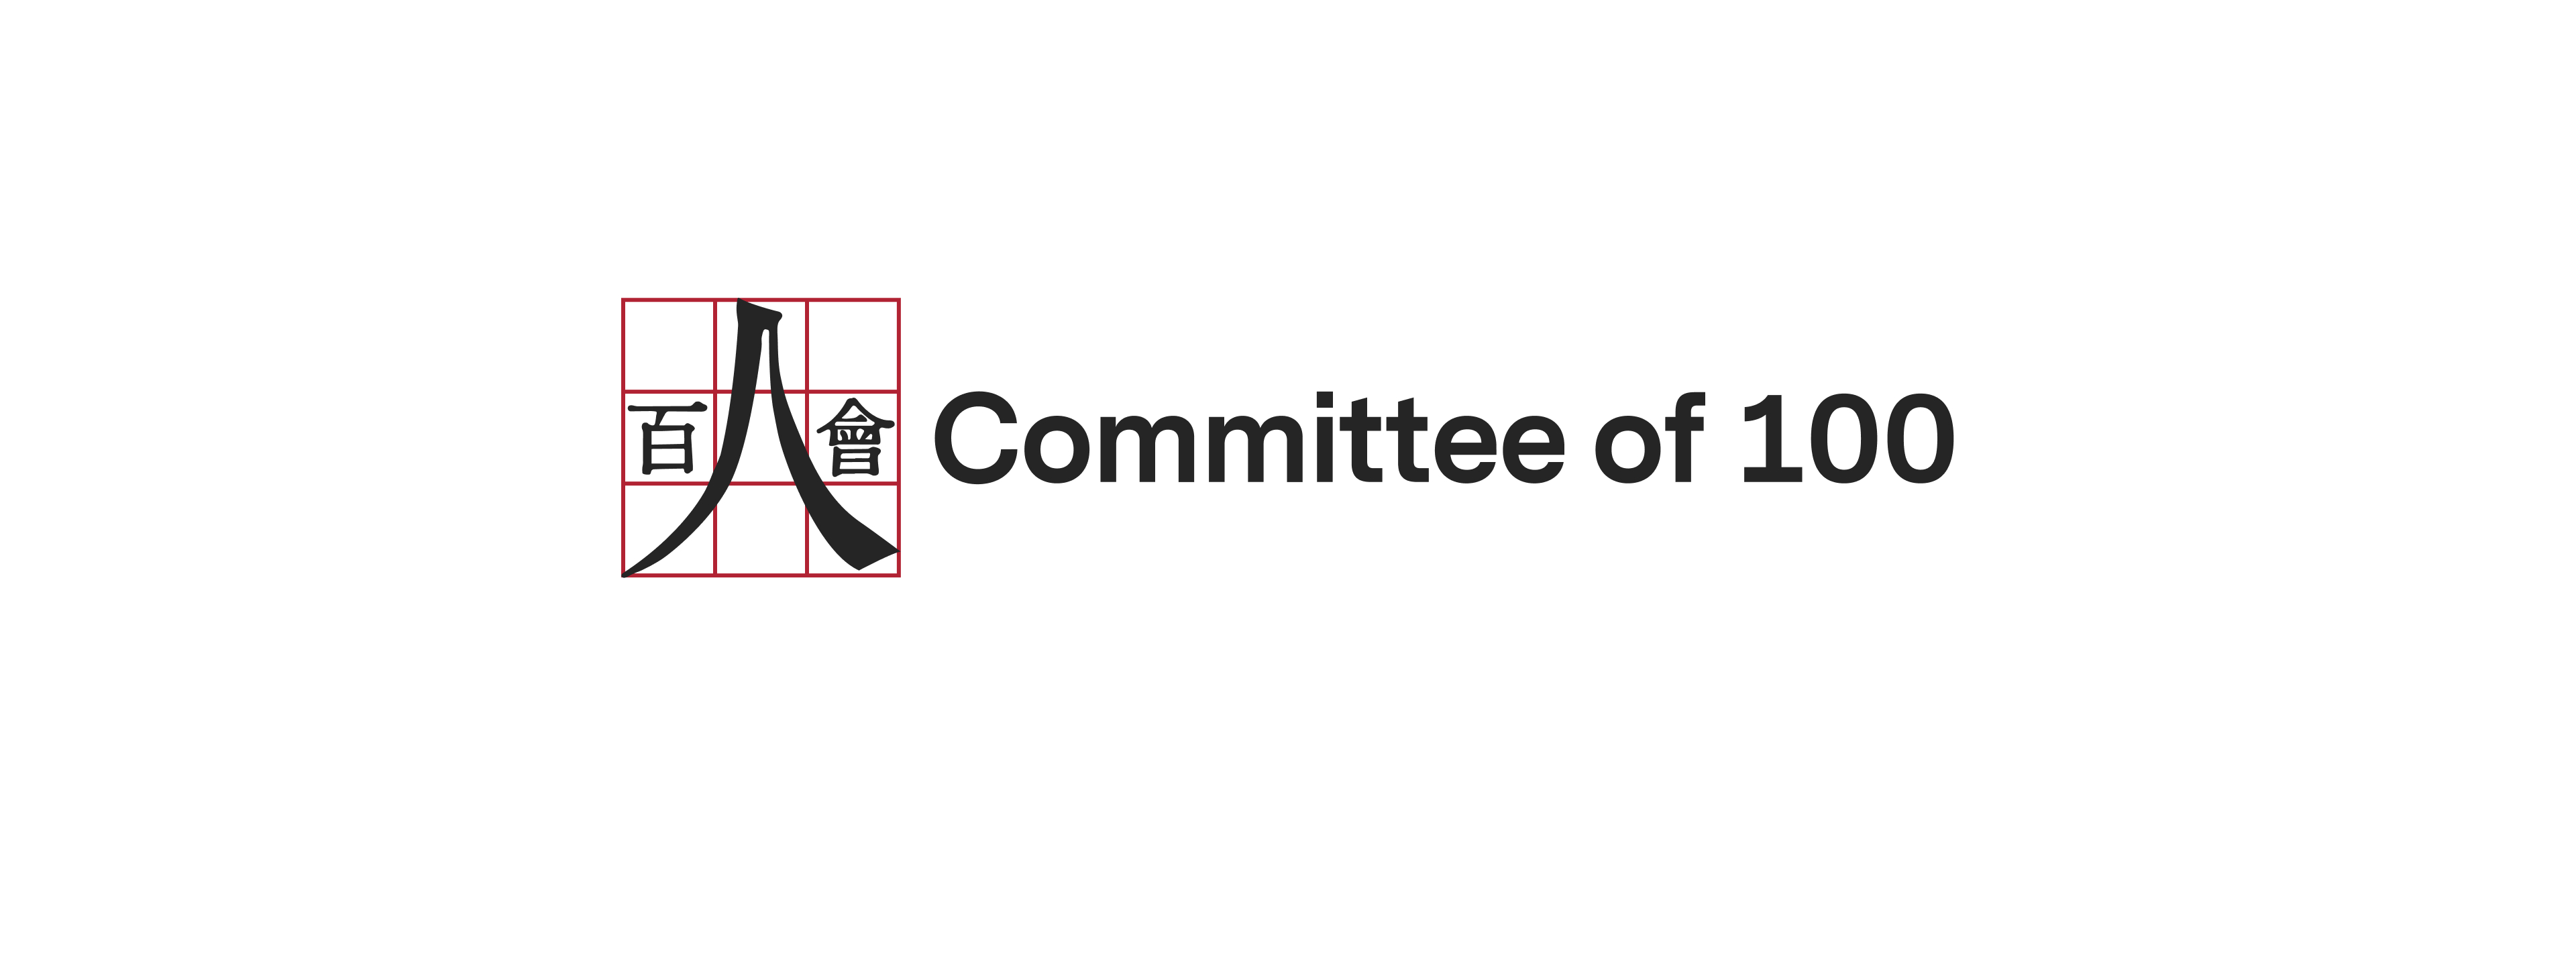 Committee of 100 Issues Letter of Support in Peter Liang Case and Urges Chinese American Community to Engage in Constructive Action